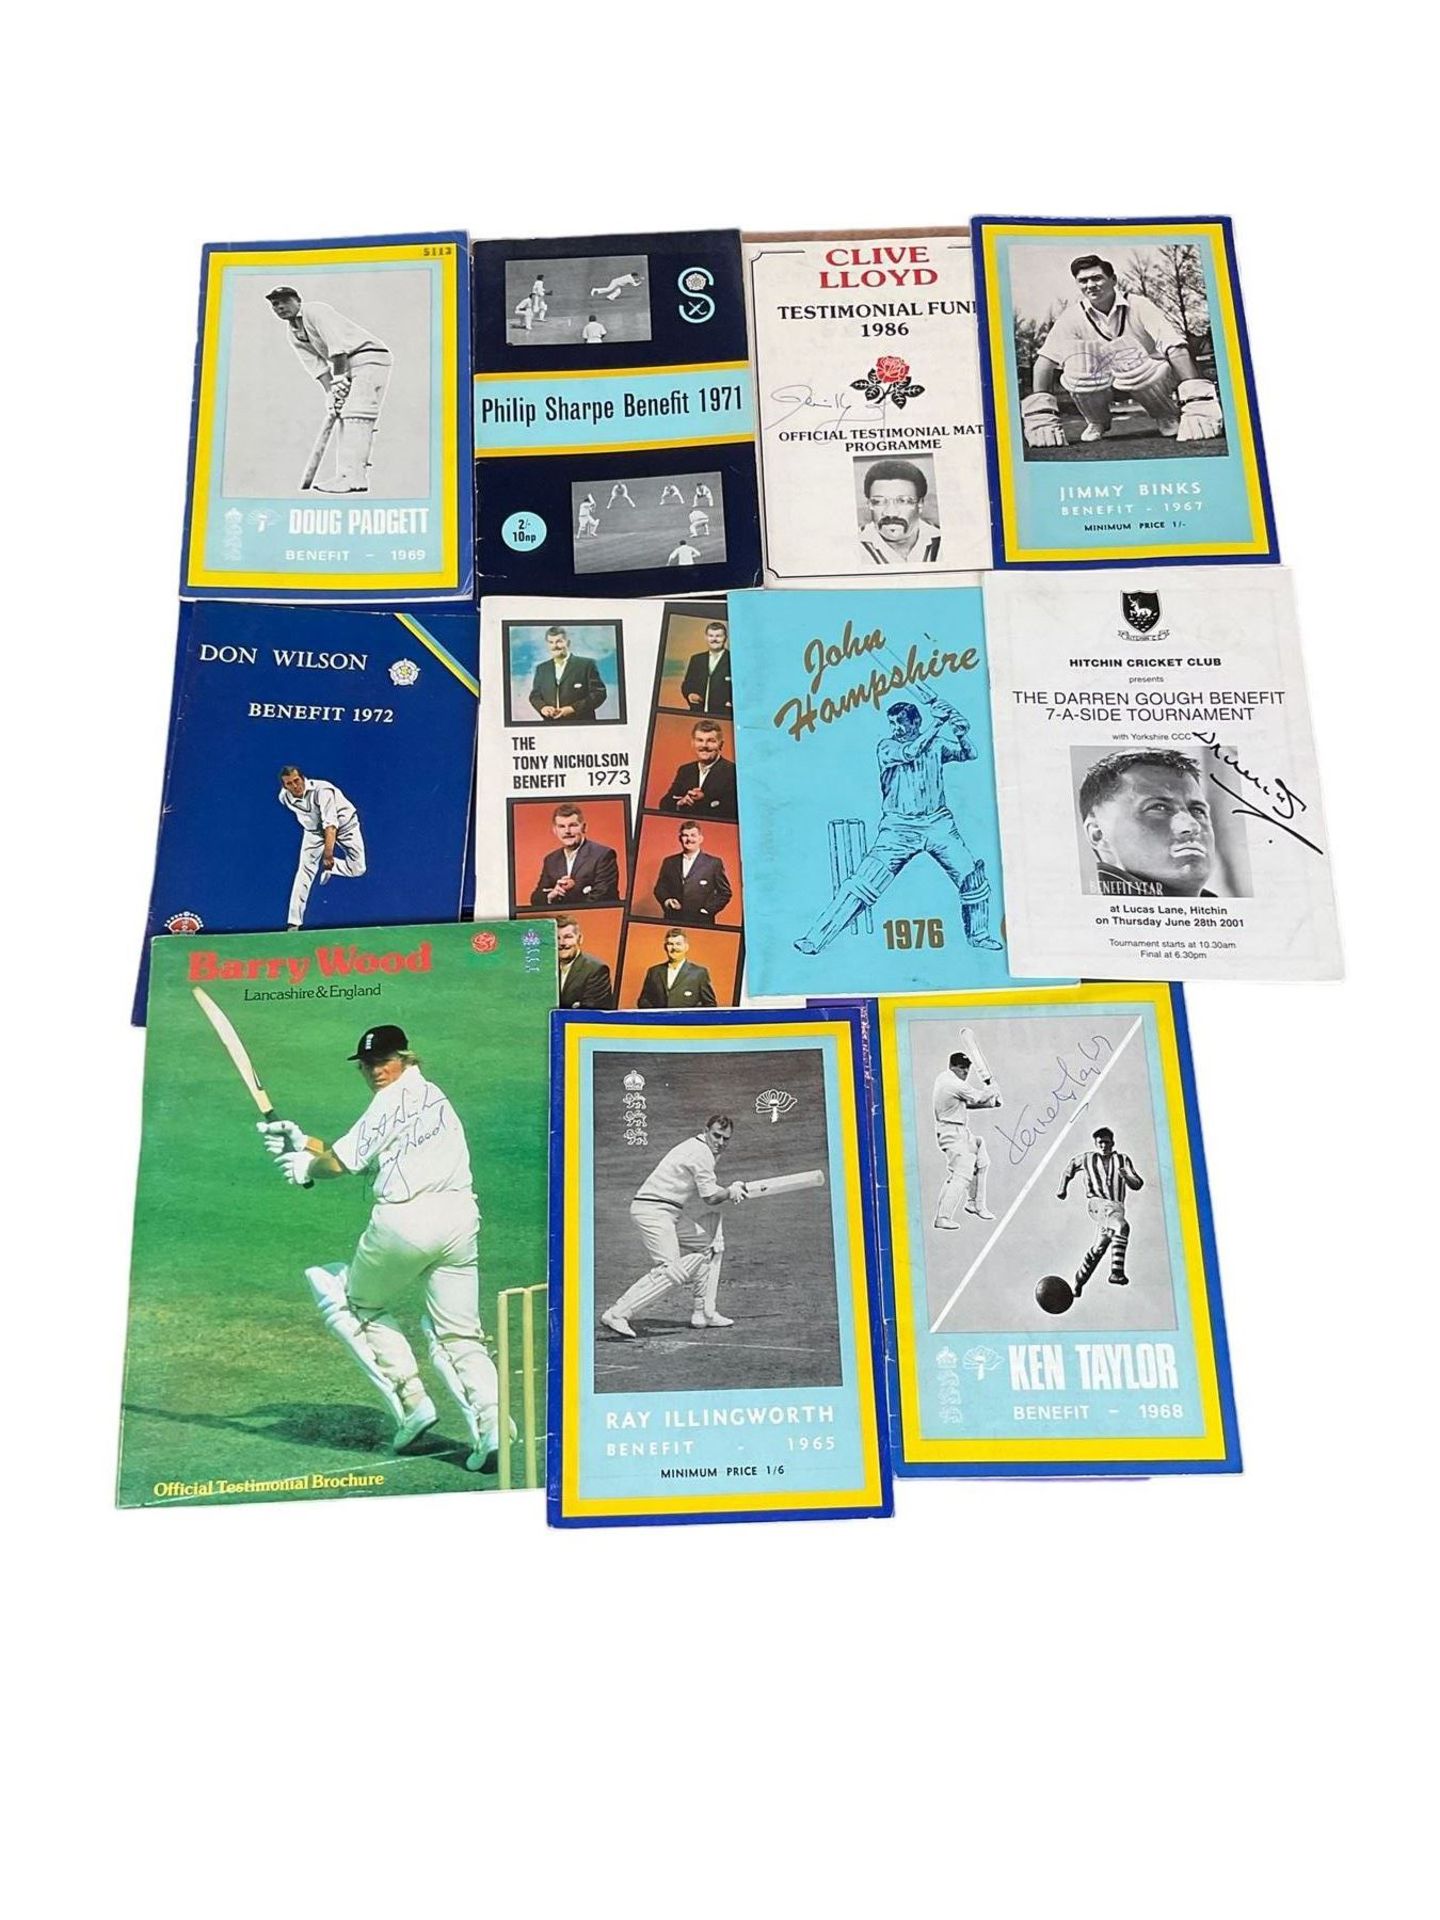 Cricketing testimonial and other match programmes - Image 3 of 3